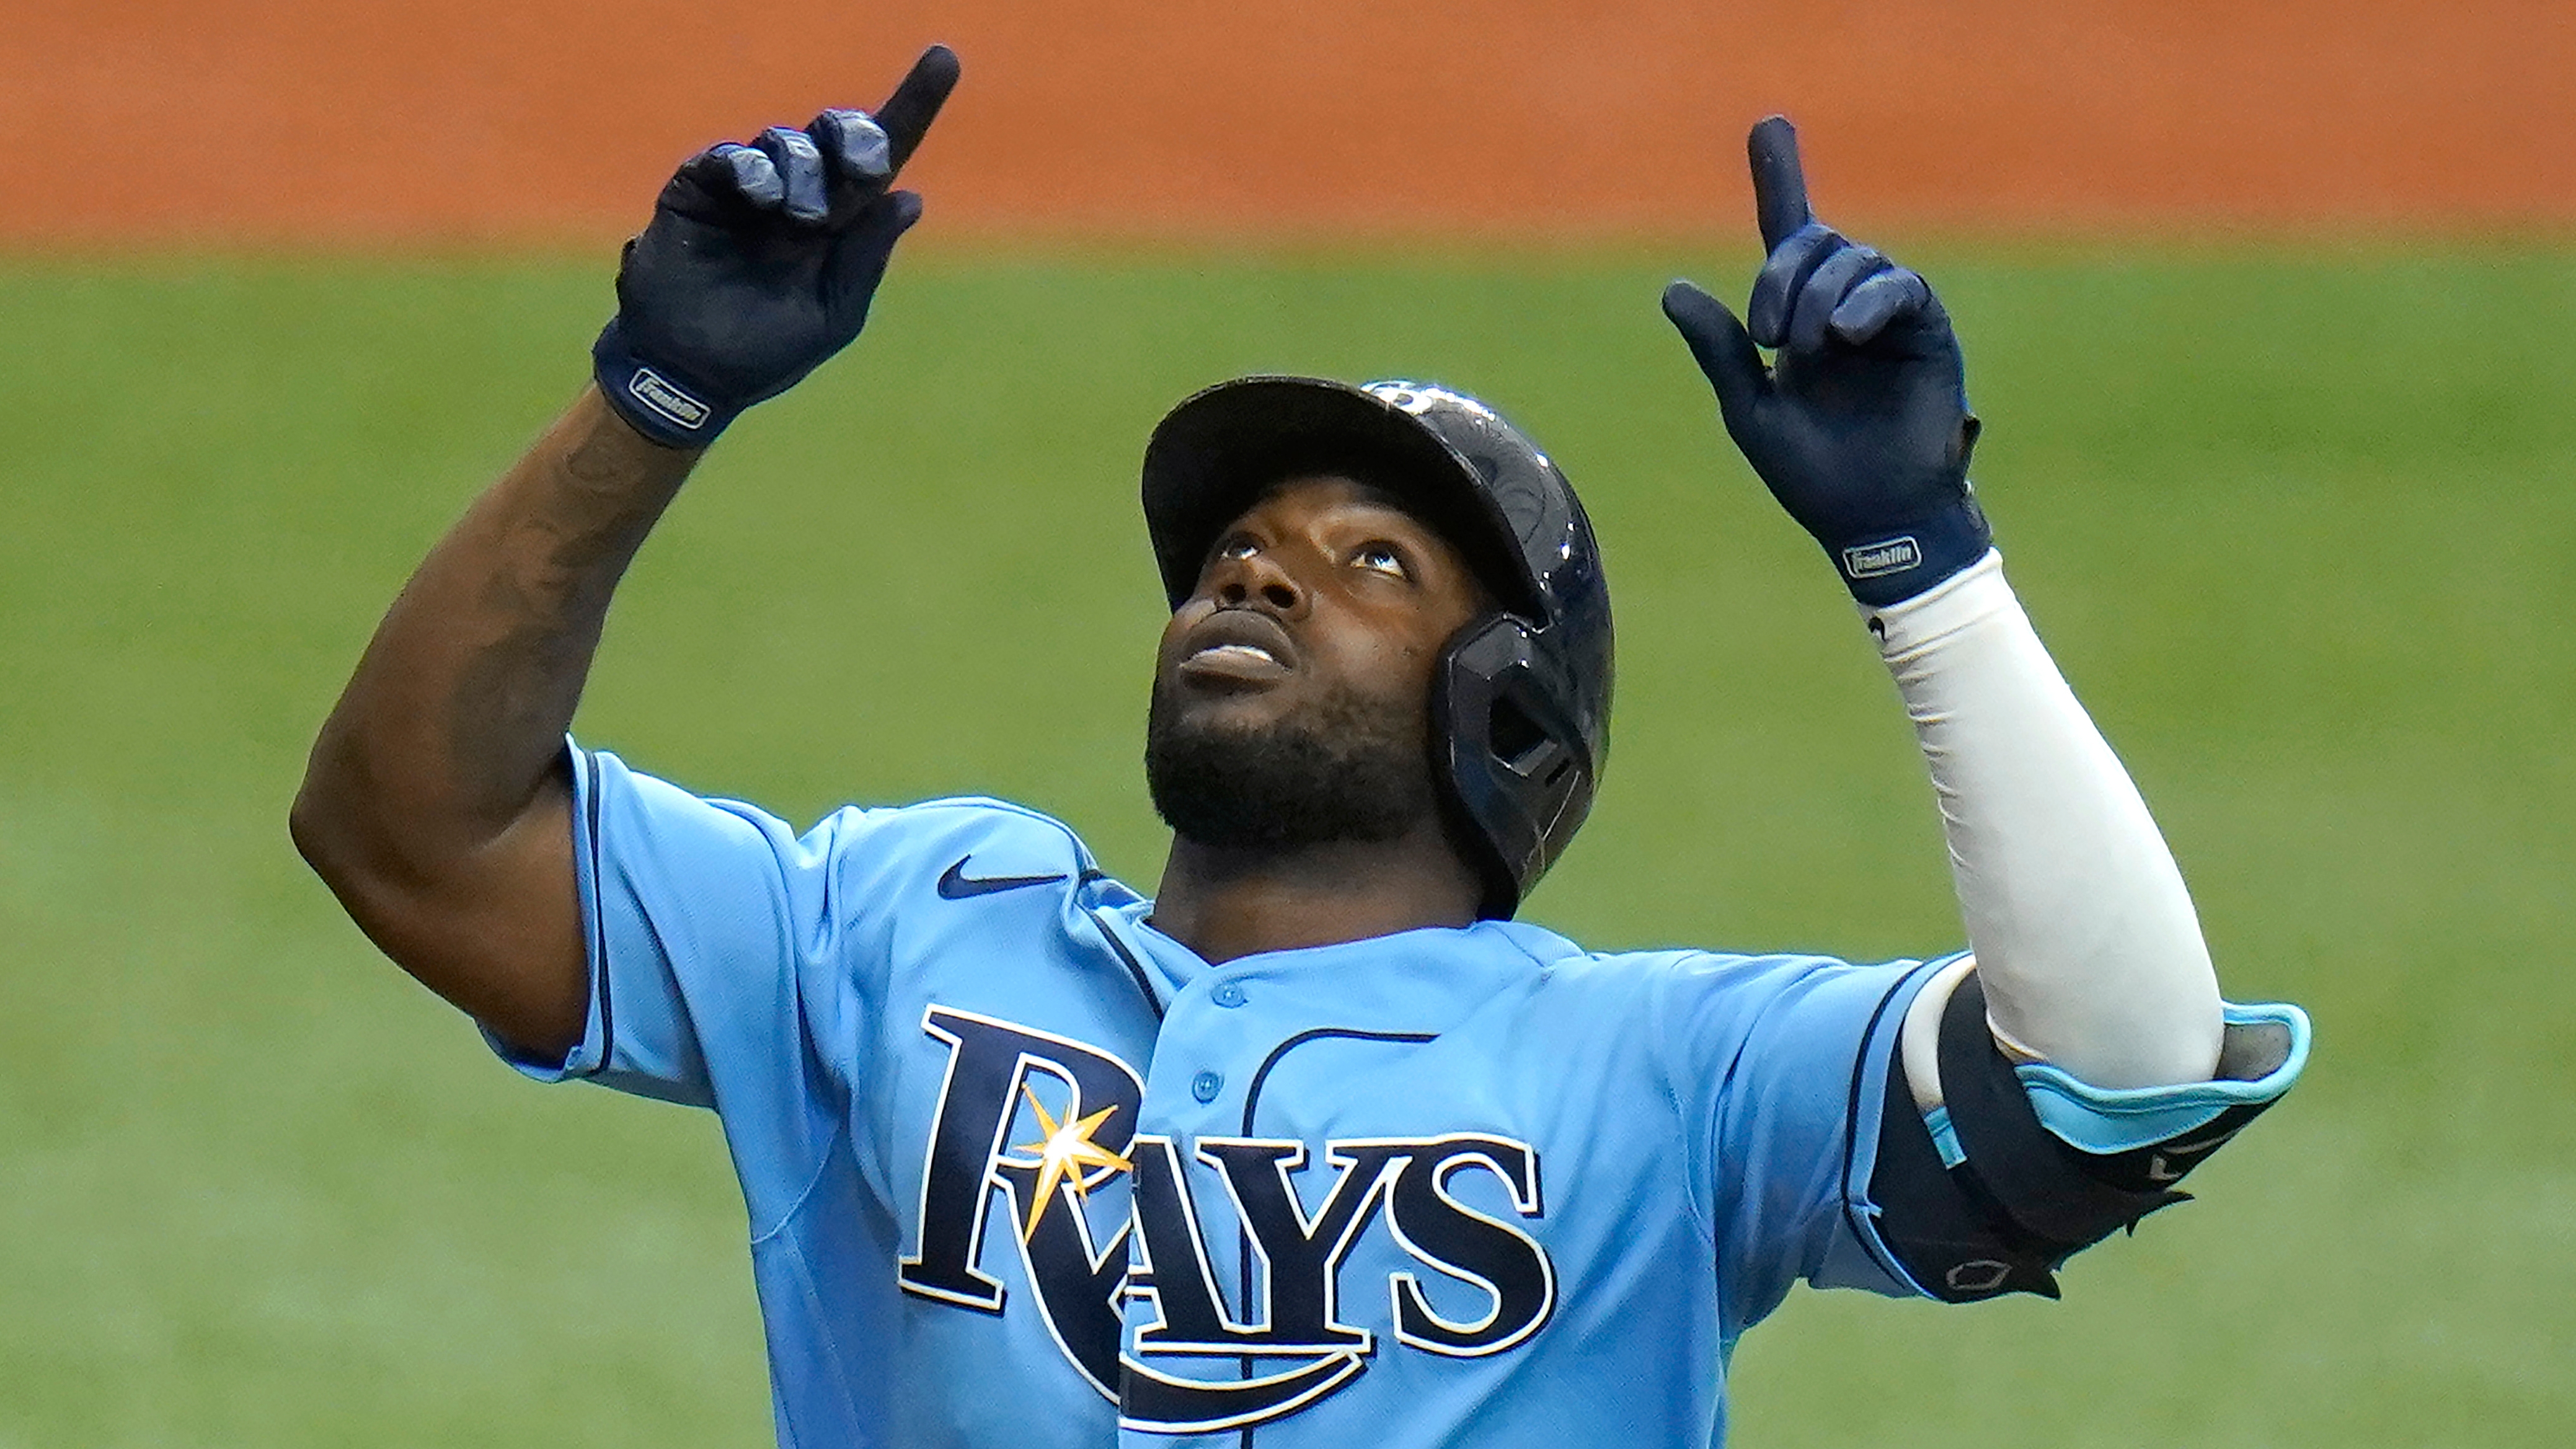 Randy Arozarena helps Rays improve to 18-2 at home